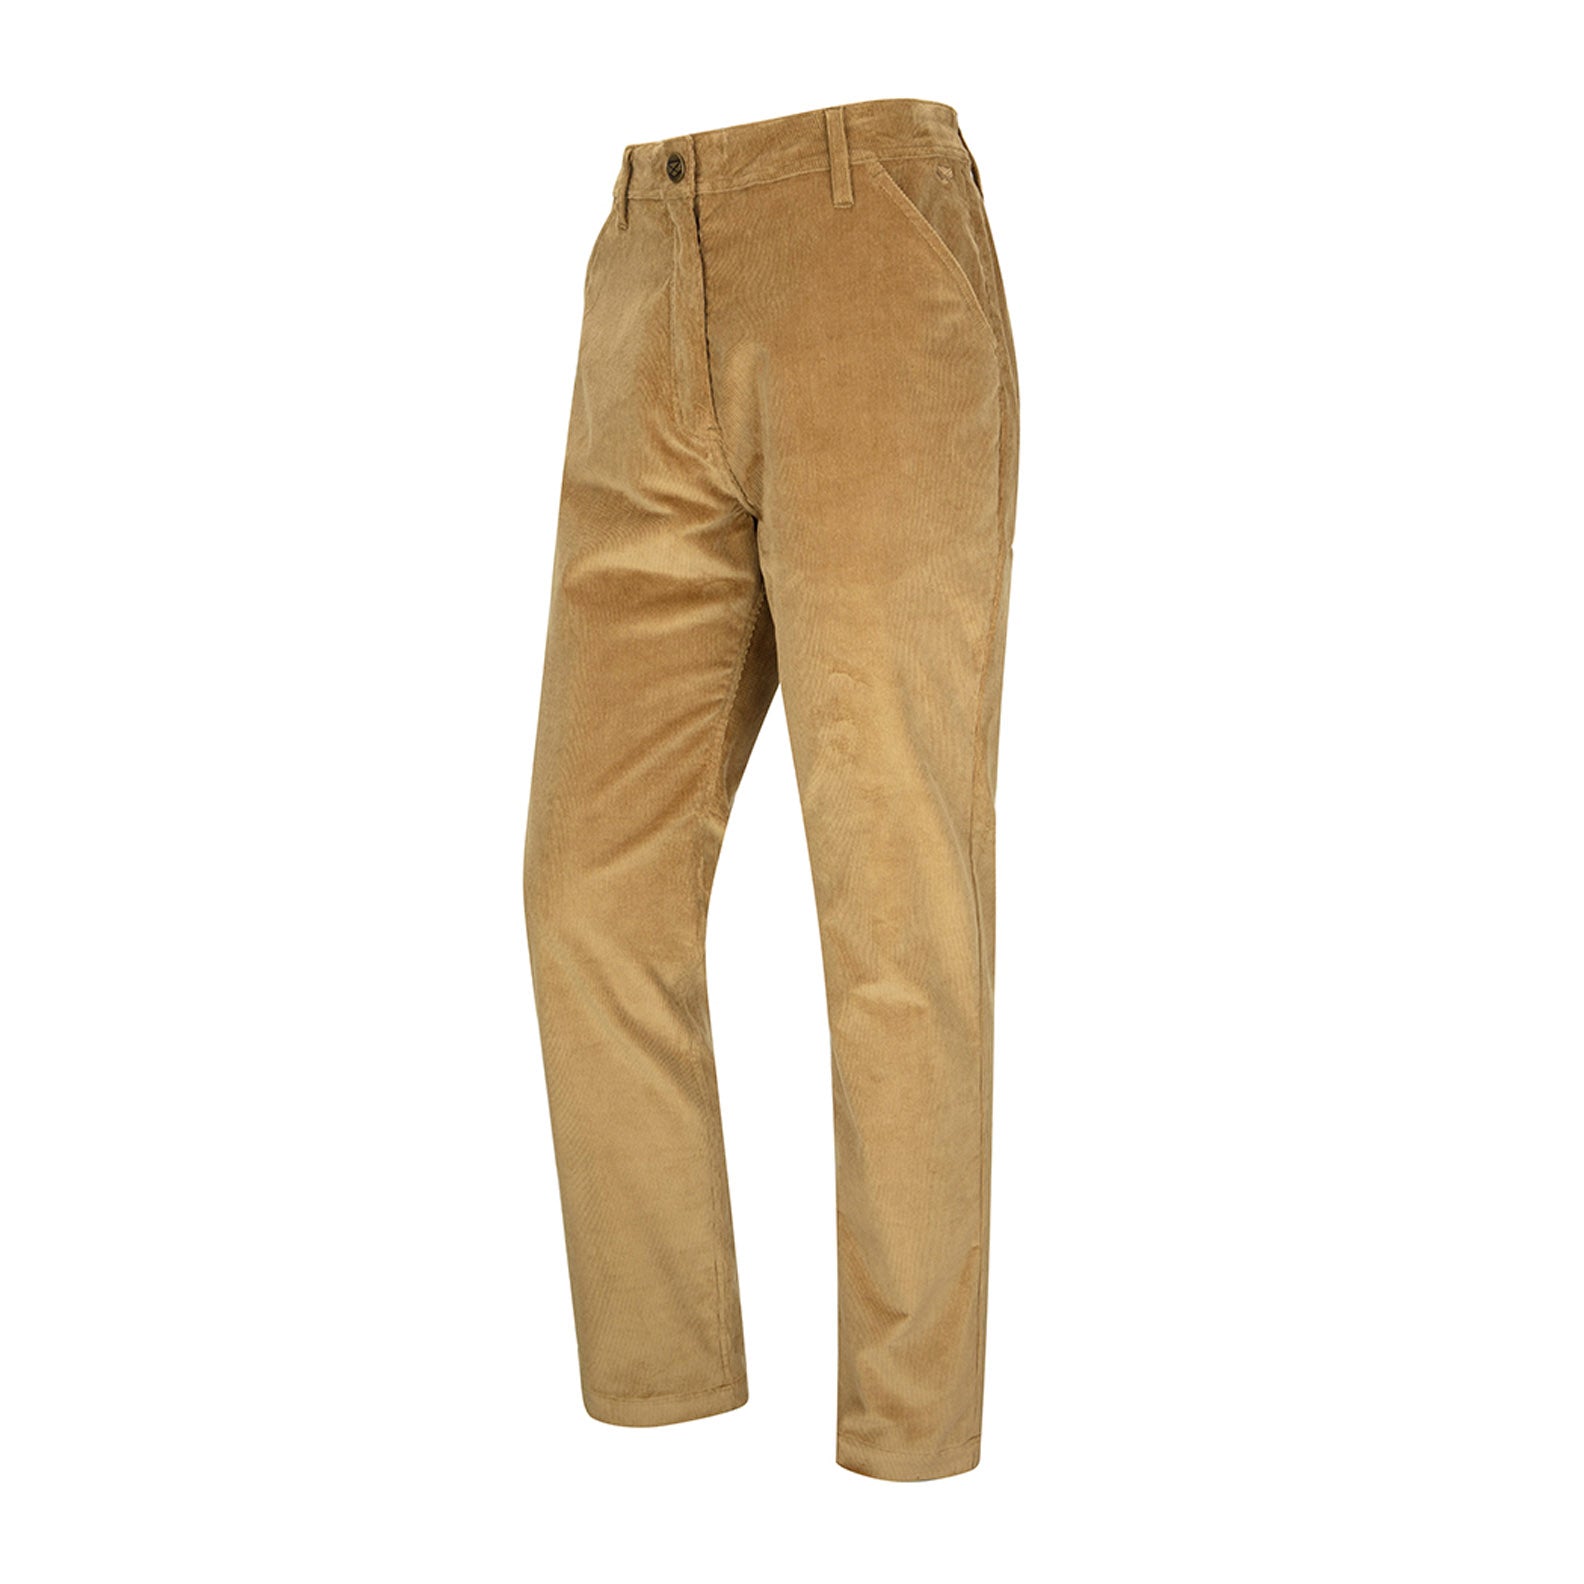 Hoggs of Fife Cairnie Comfort Stretch Cord Trousers